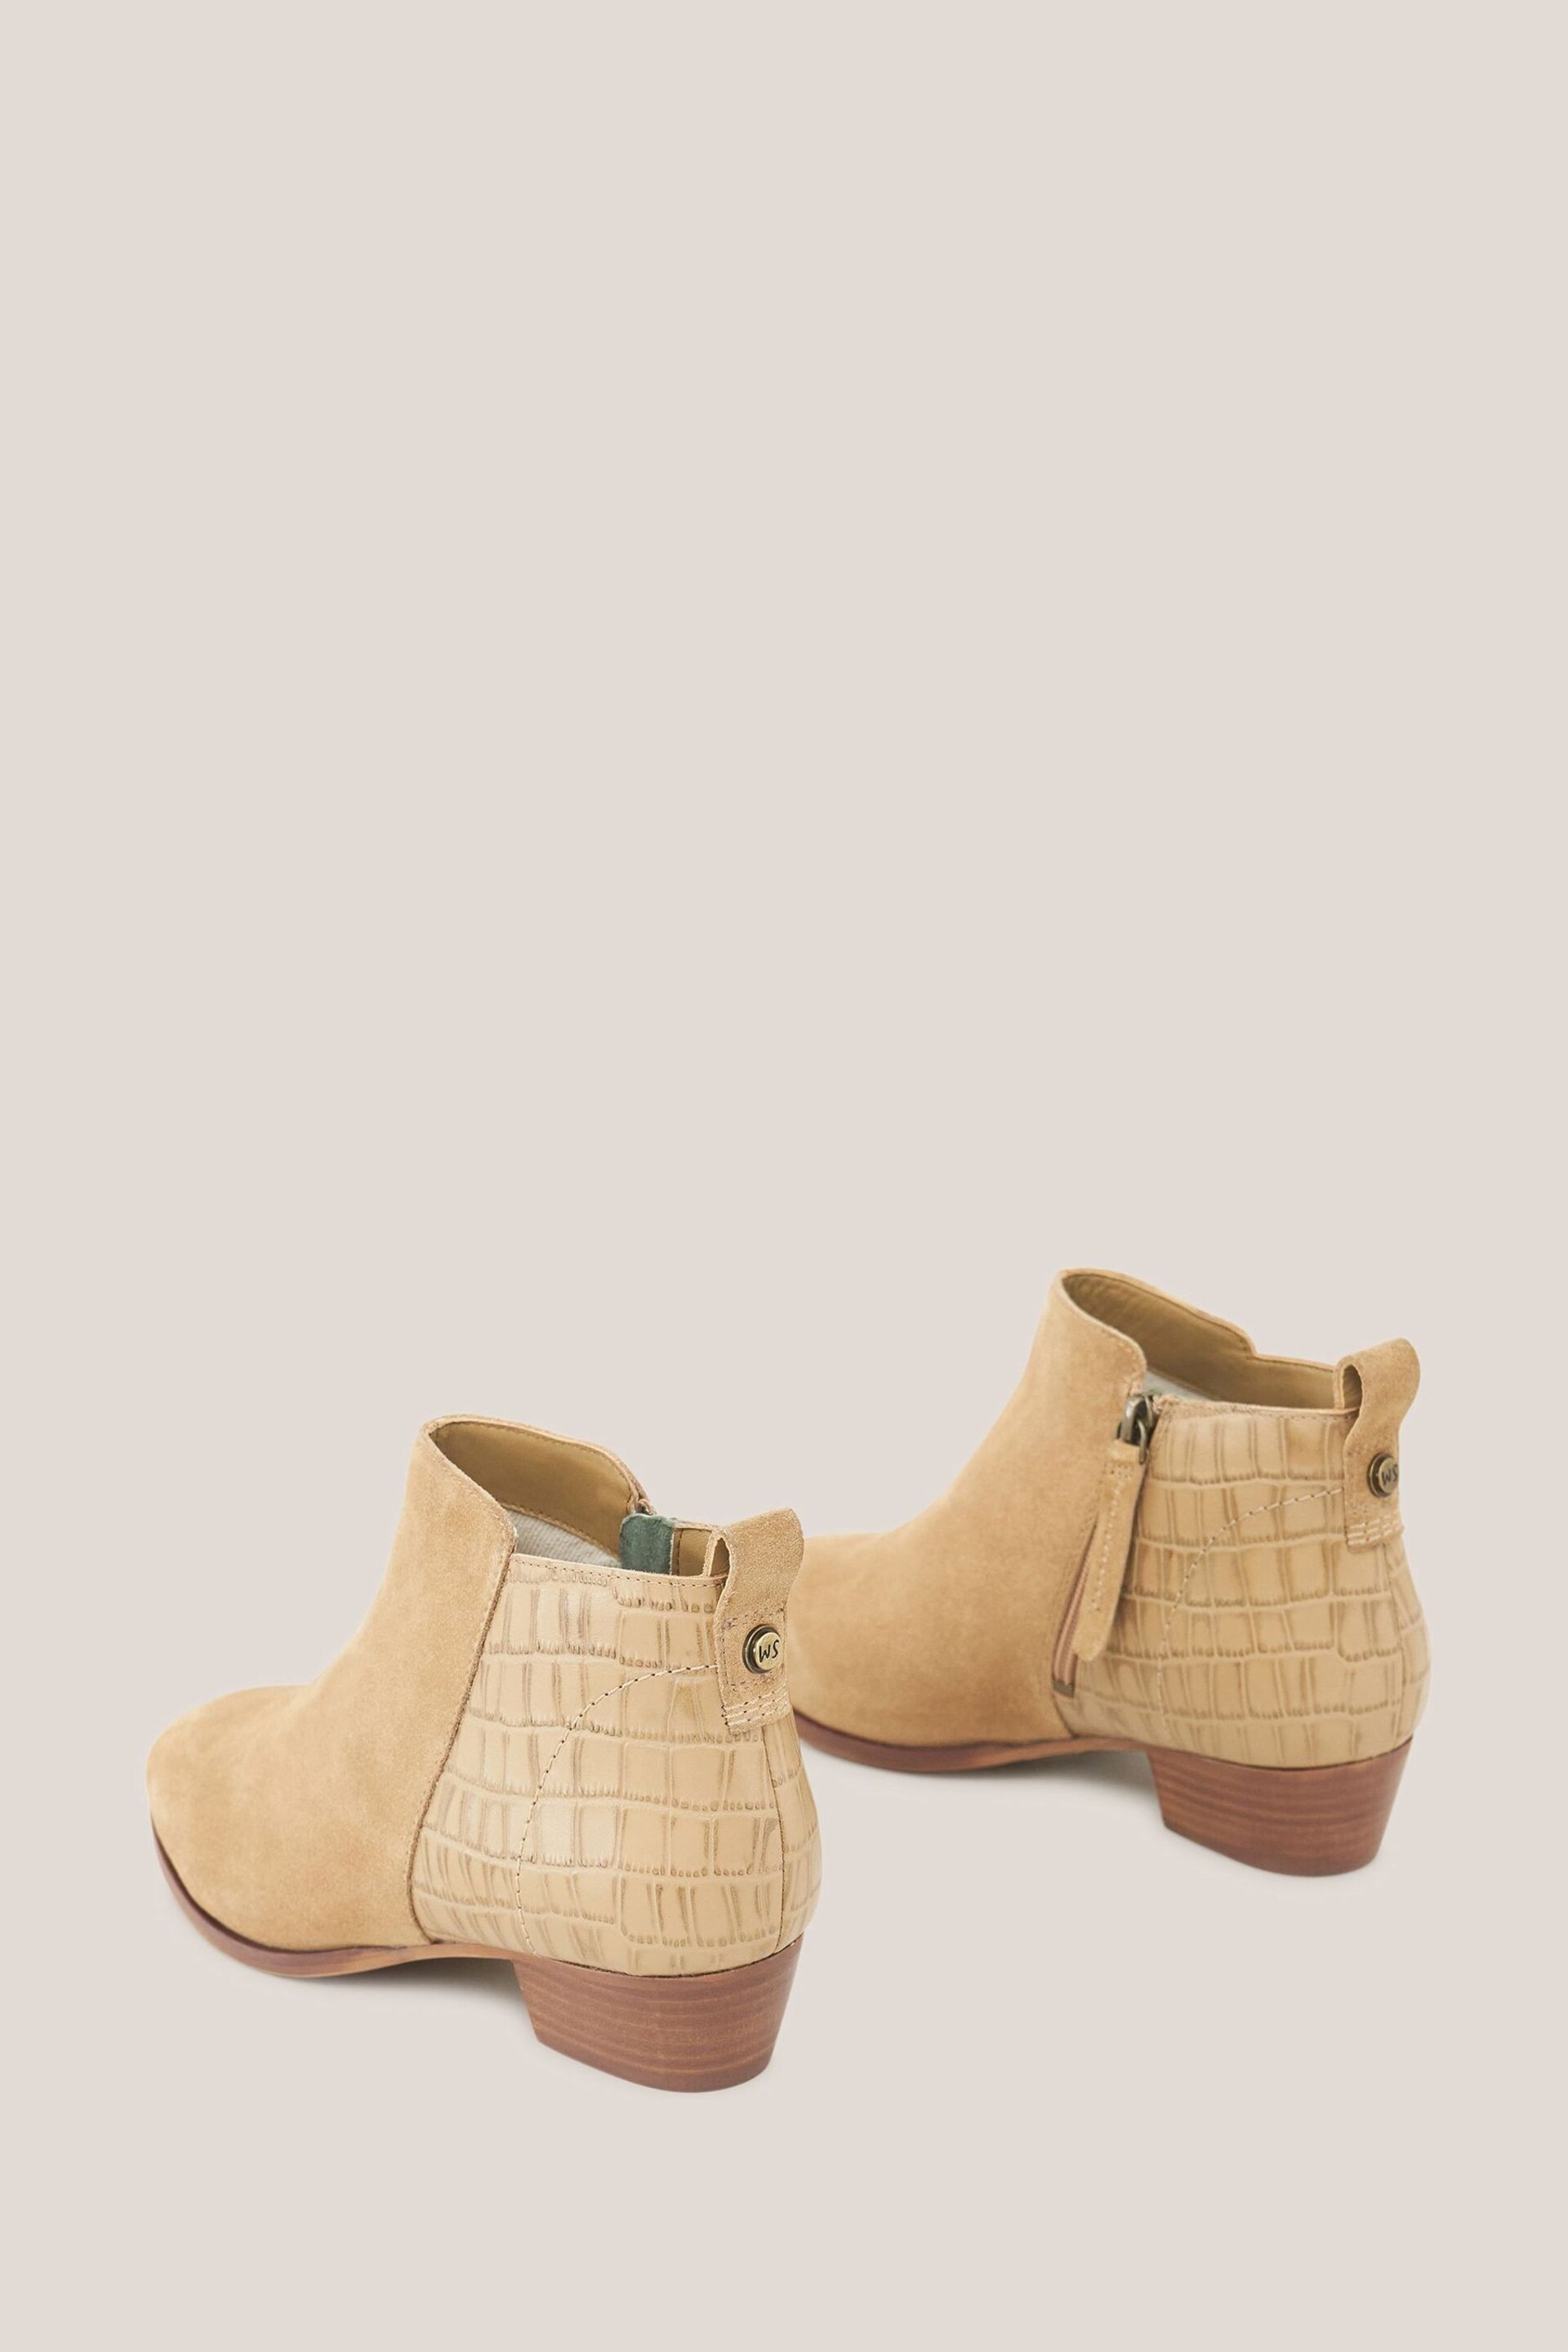 White Stuff Natural Willow Leather Ankle Boots - Image 3 of 3